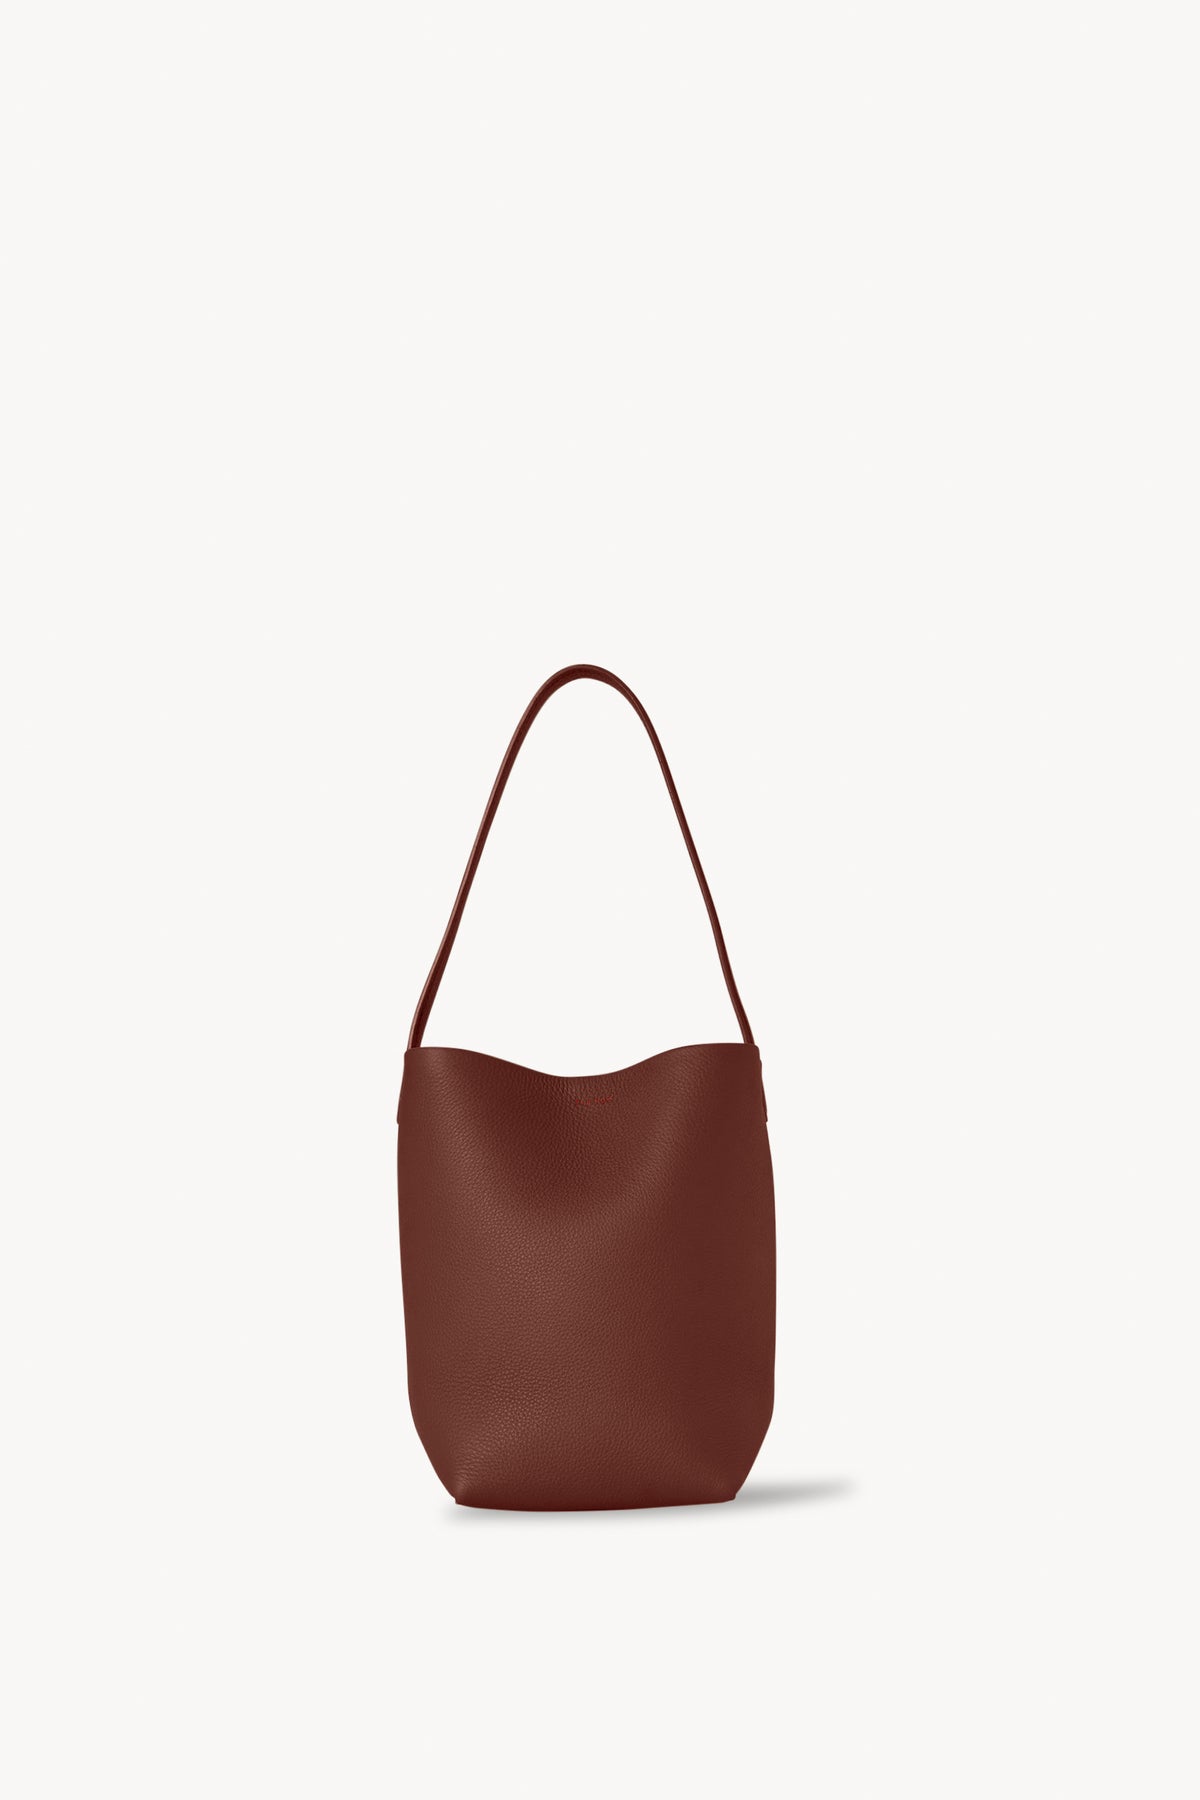 The Row Leather N/S Park Tote - Shoulder Bags, Handbags